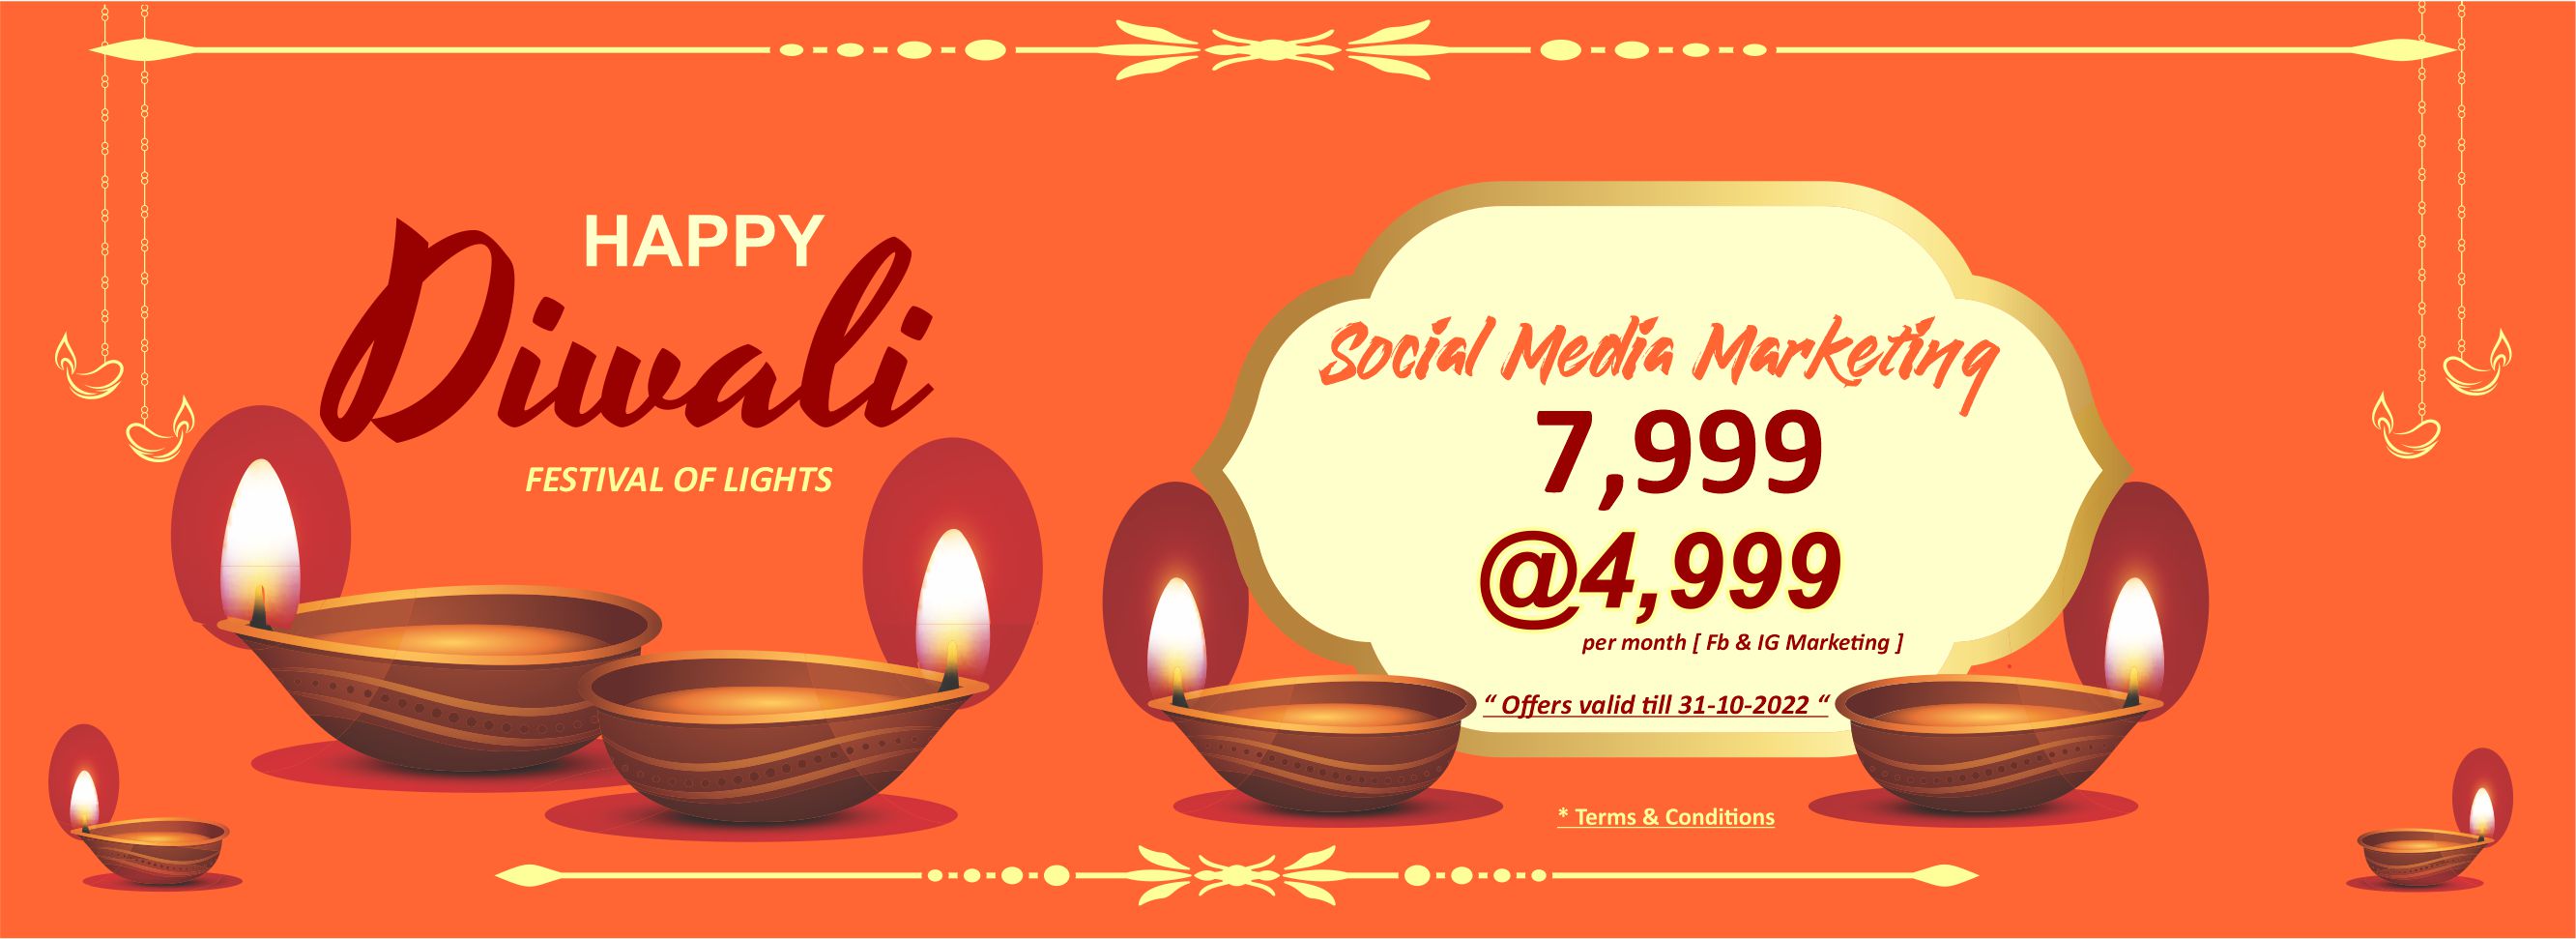 social_media_marketing_anch_technologies_offers_2022